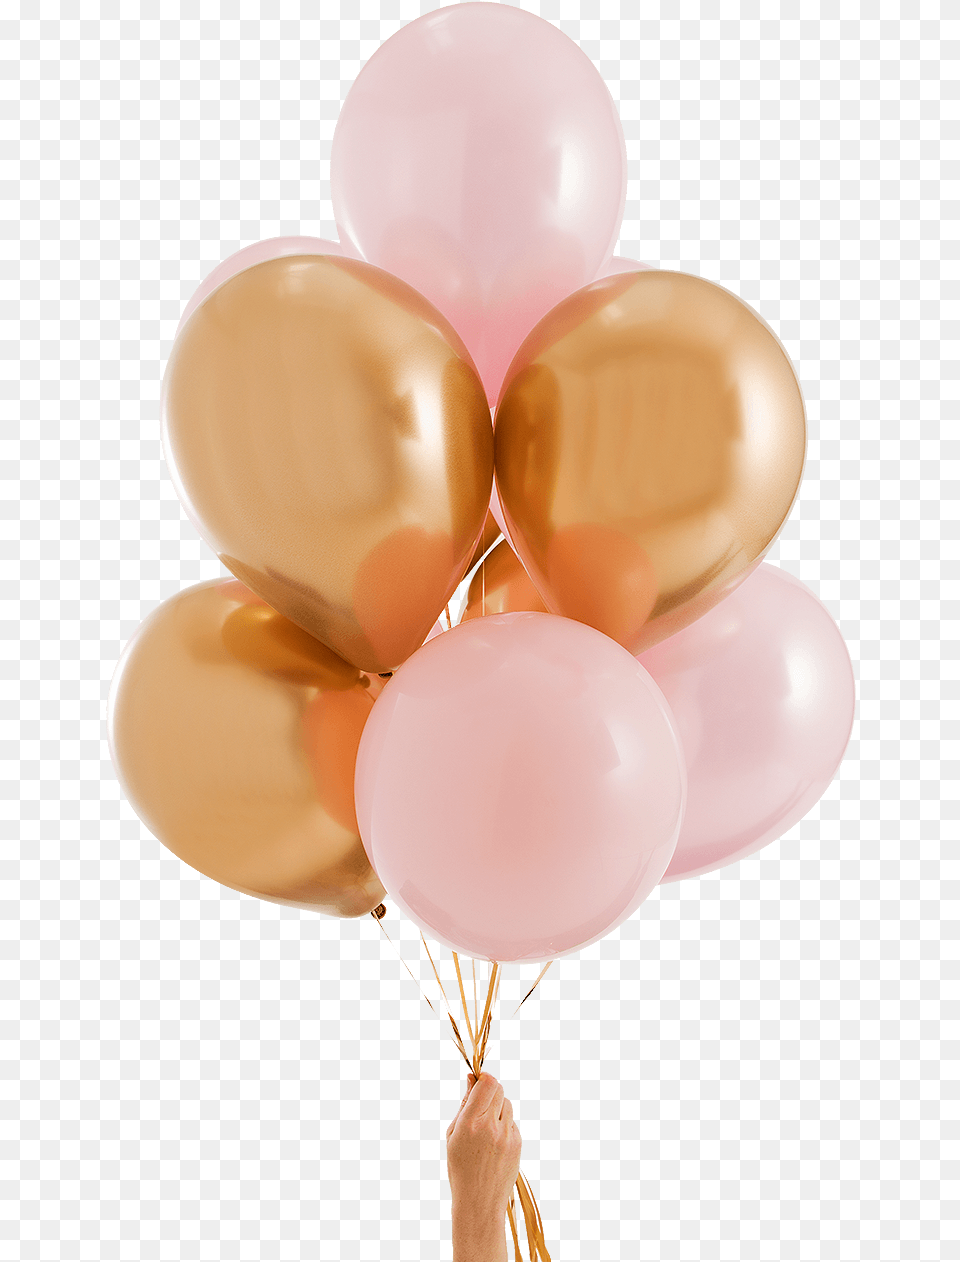 Elegant Pink U0026 Gold Party Balloons 14 Pink And Gold Balloons, Balloon Png